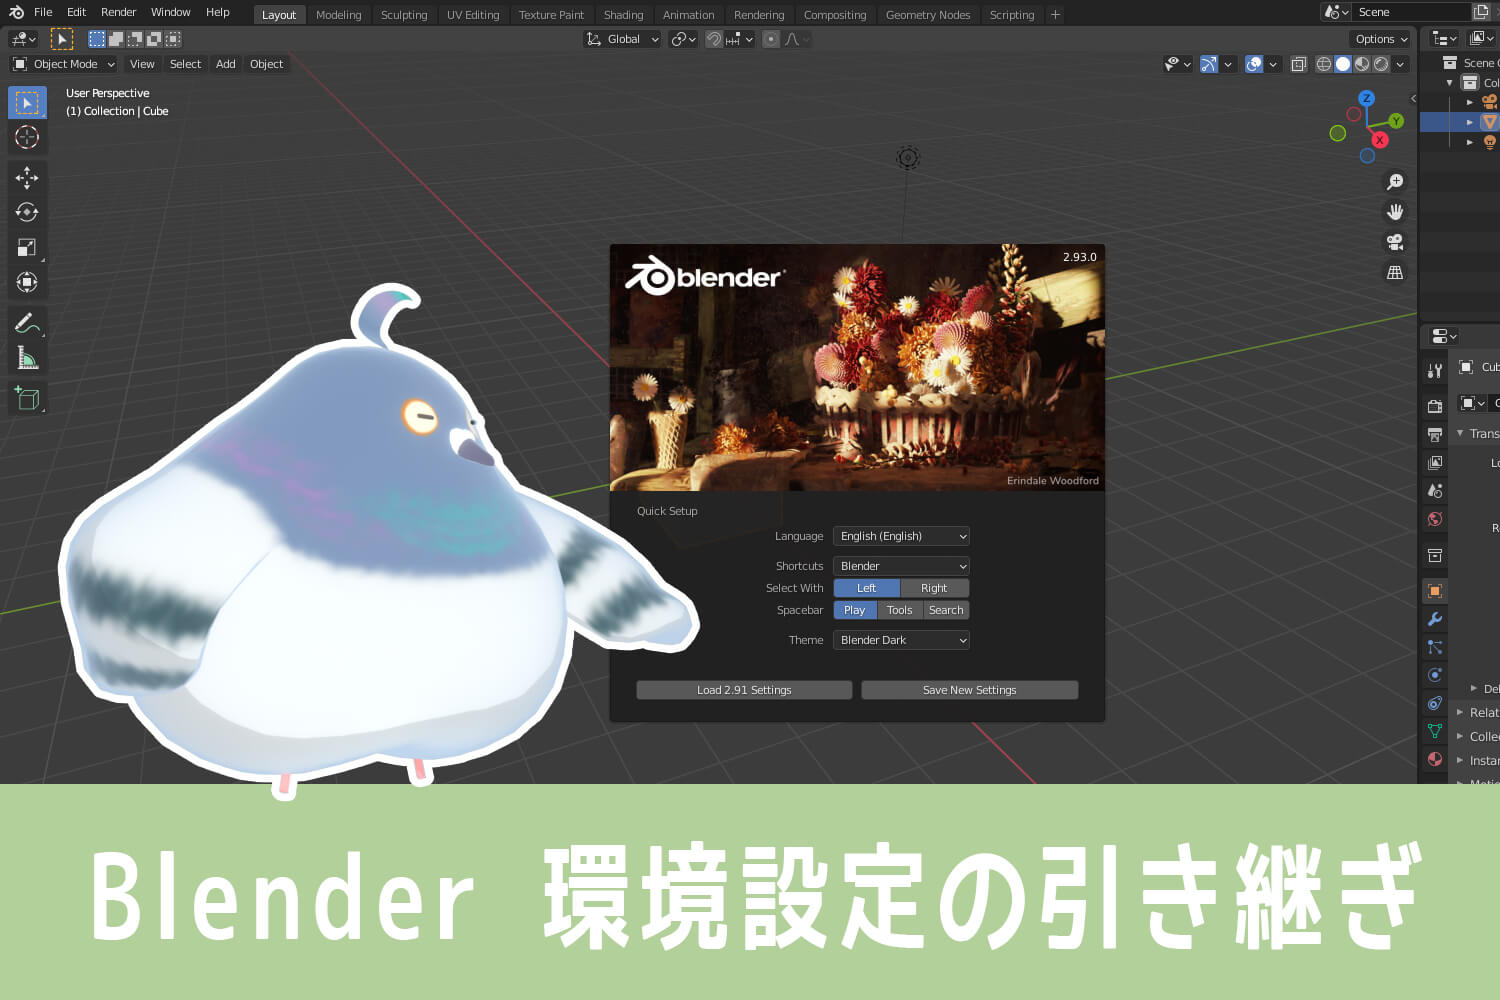 Take Over Blender Preferences - Help Transition From Old Version To New Version